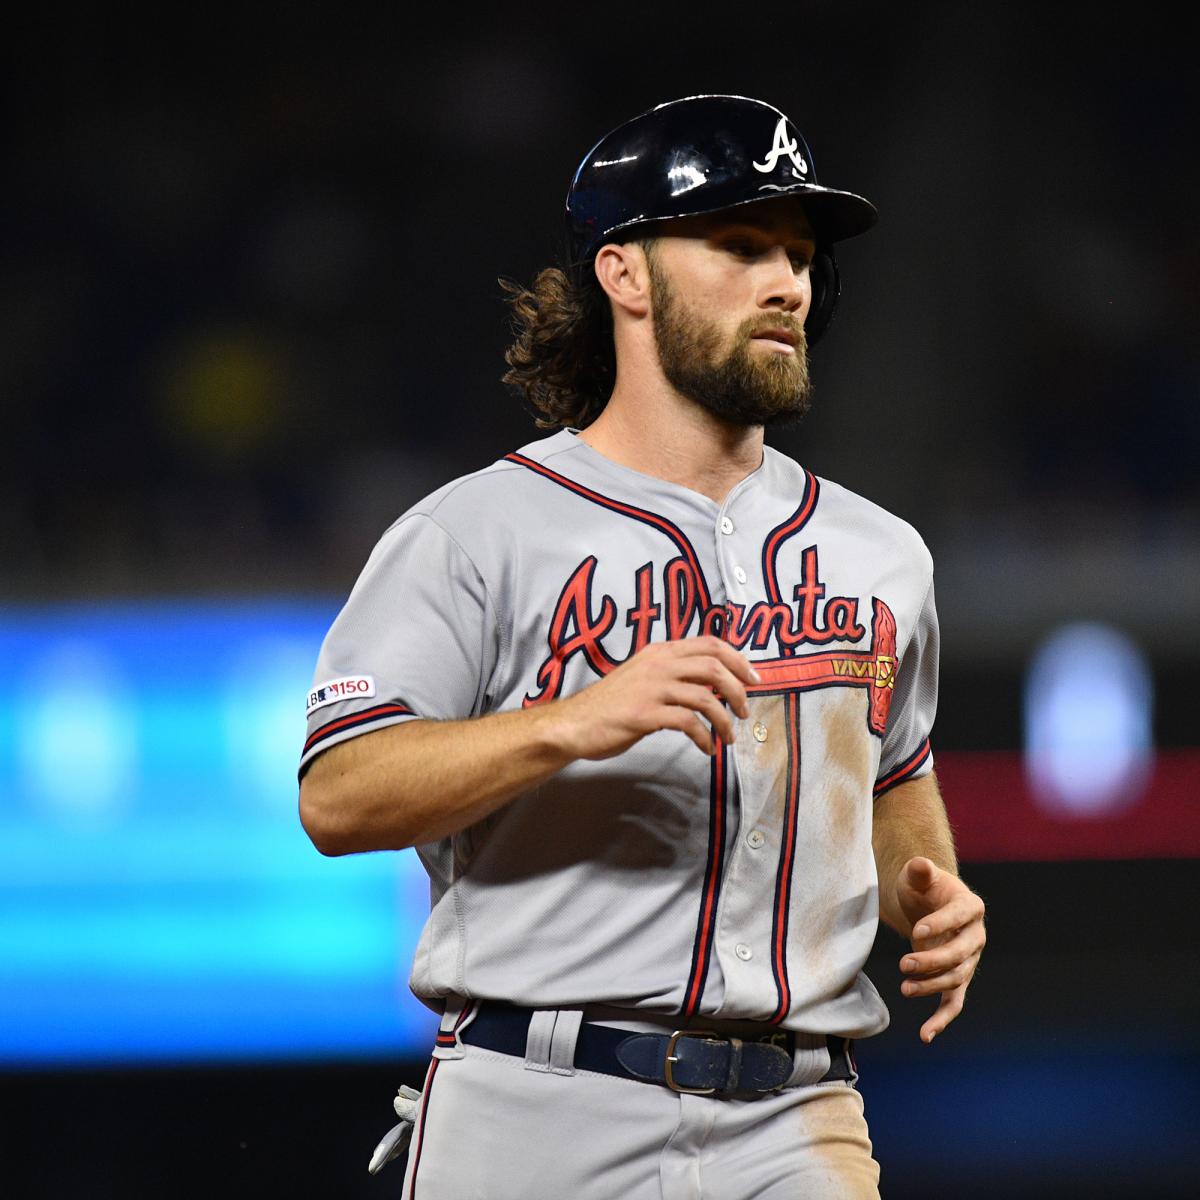 Braves outfielder Charlie Culberson was hit in the face with a 90